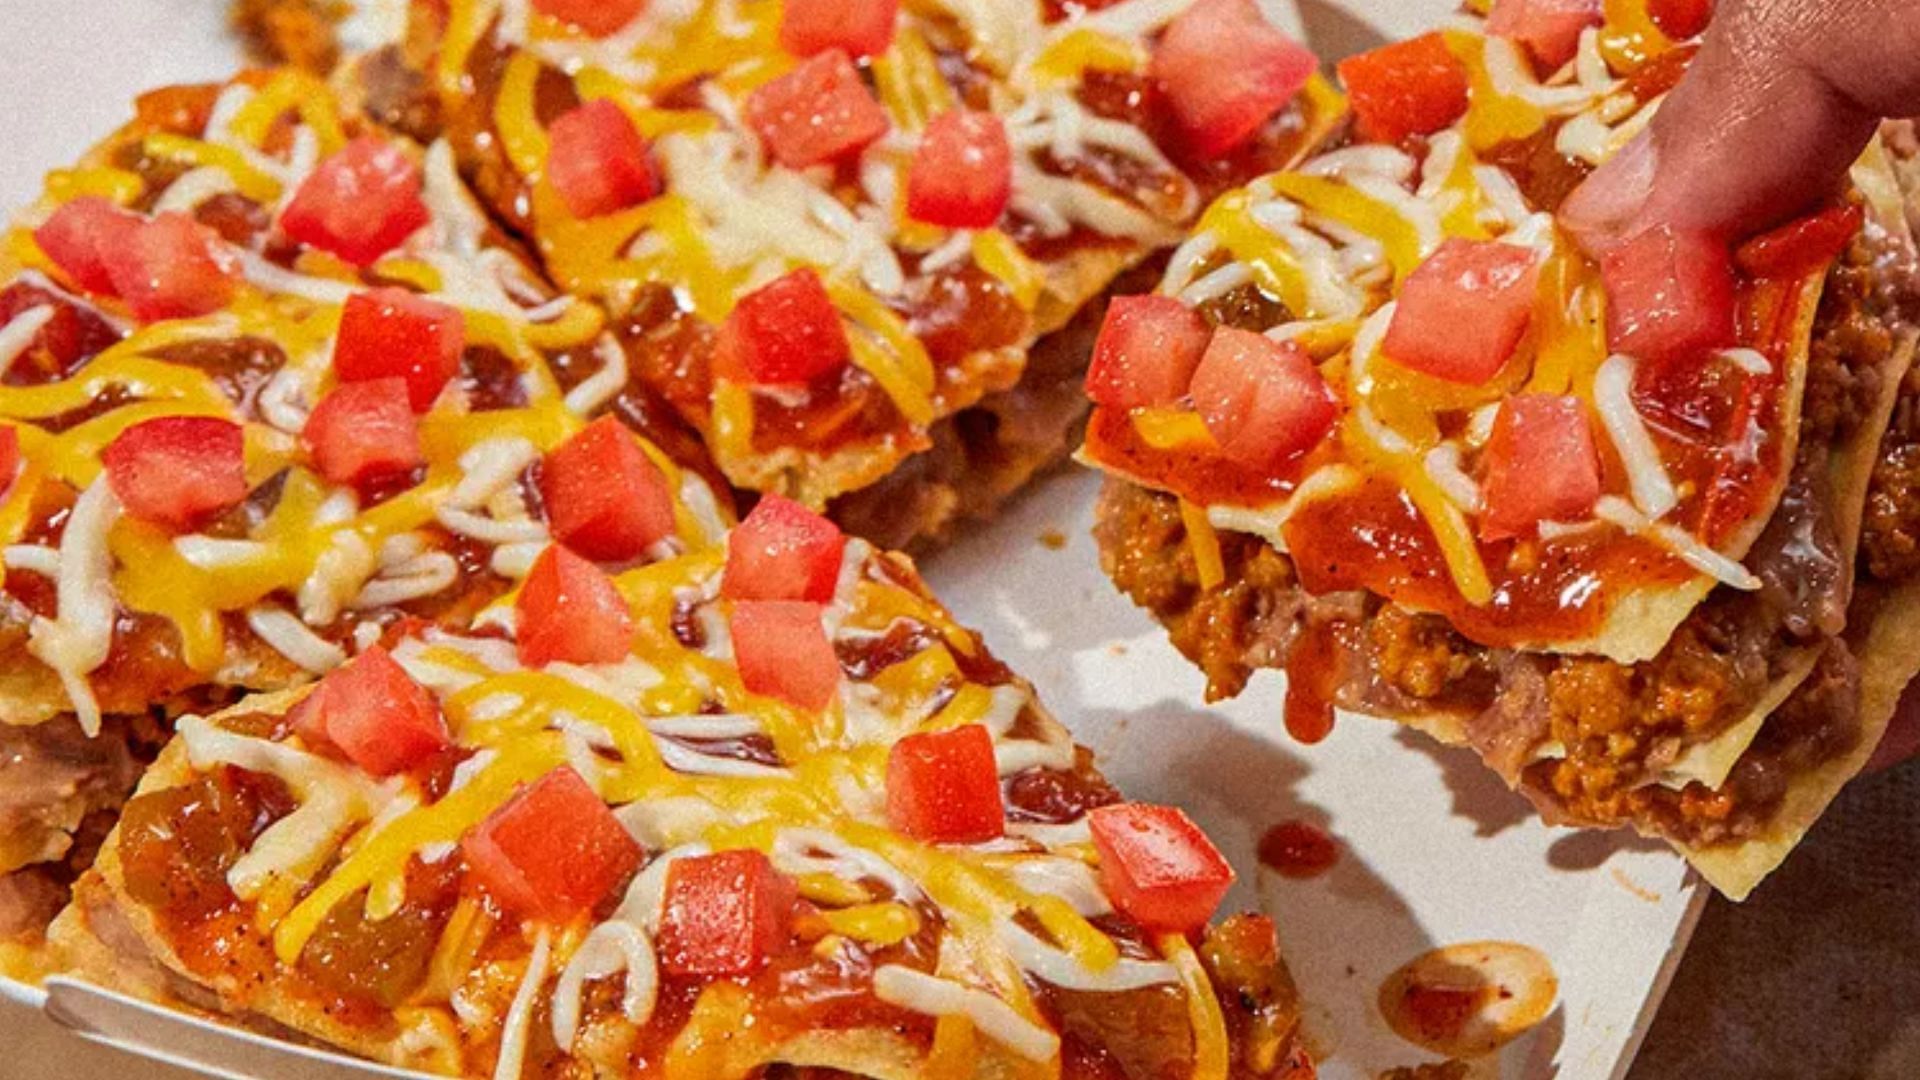 Omaha customers can enjoy a new Triple Crunch Mexican Pizza (image via Taco Bell)